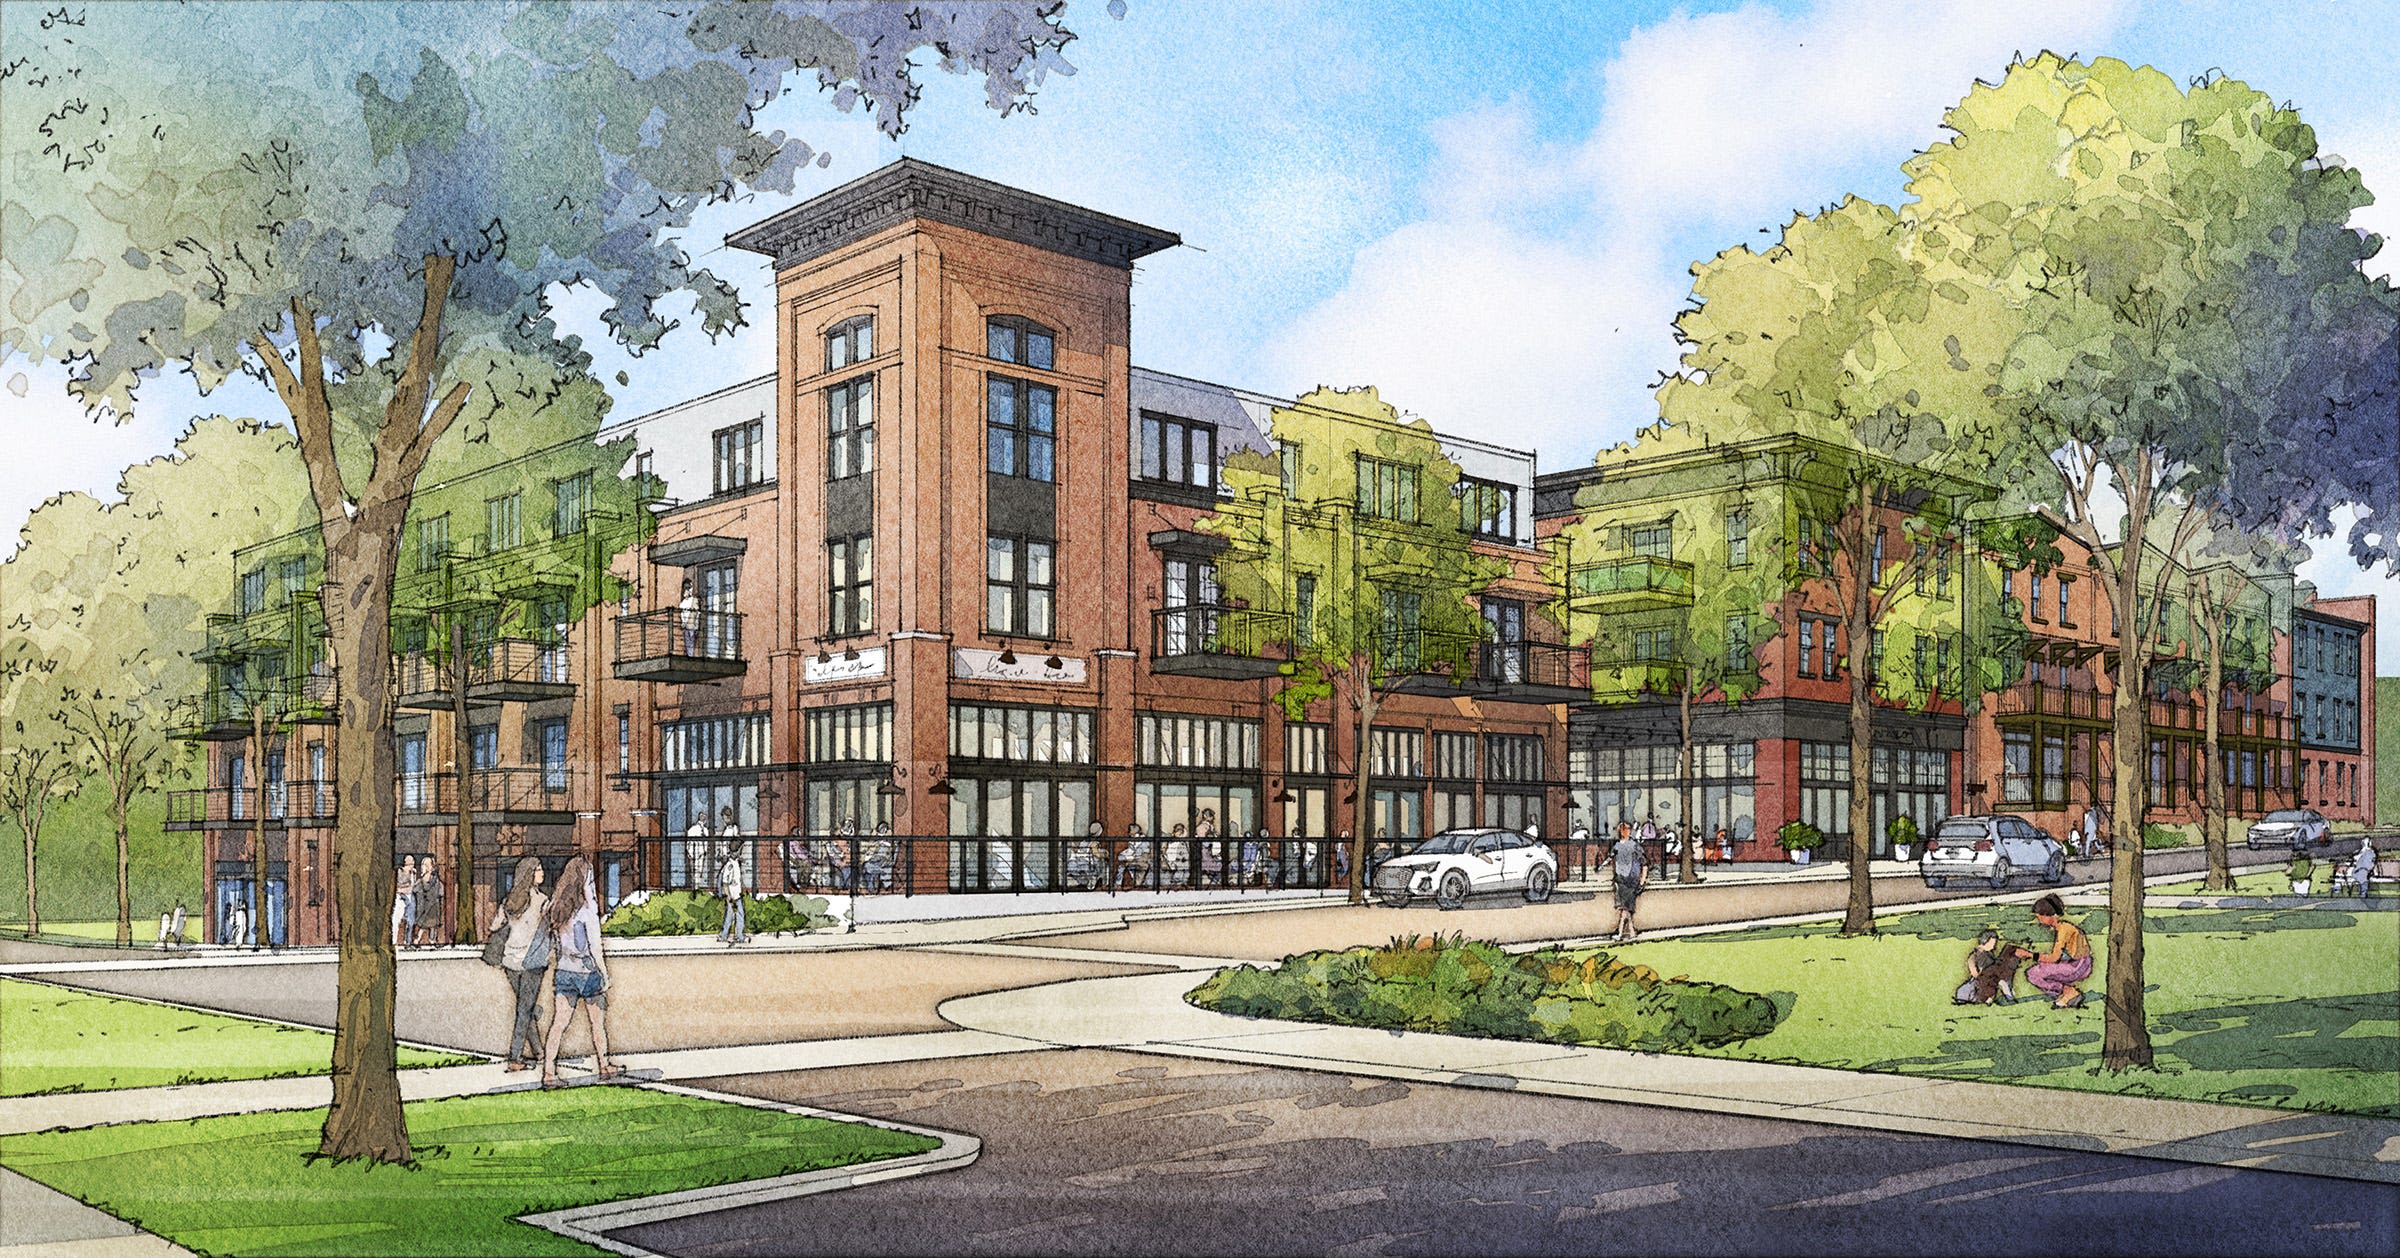 Middle Tennessee town plans two new developments, offering homes, retail, restaurants